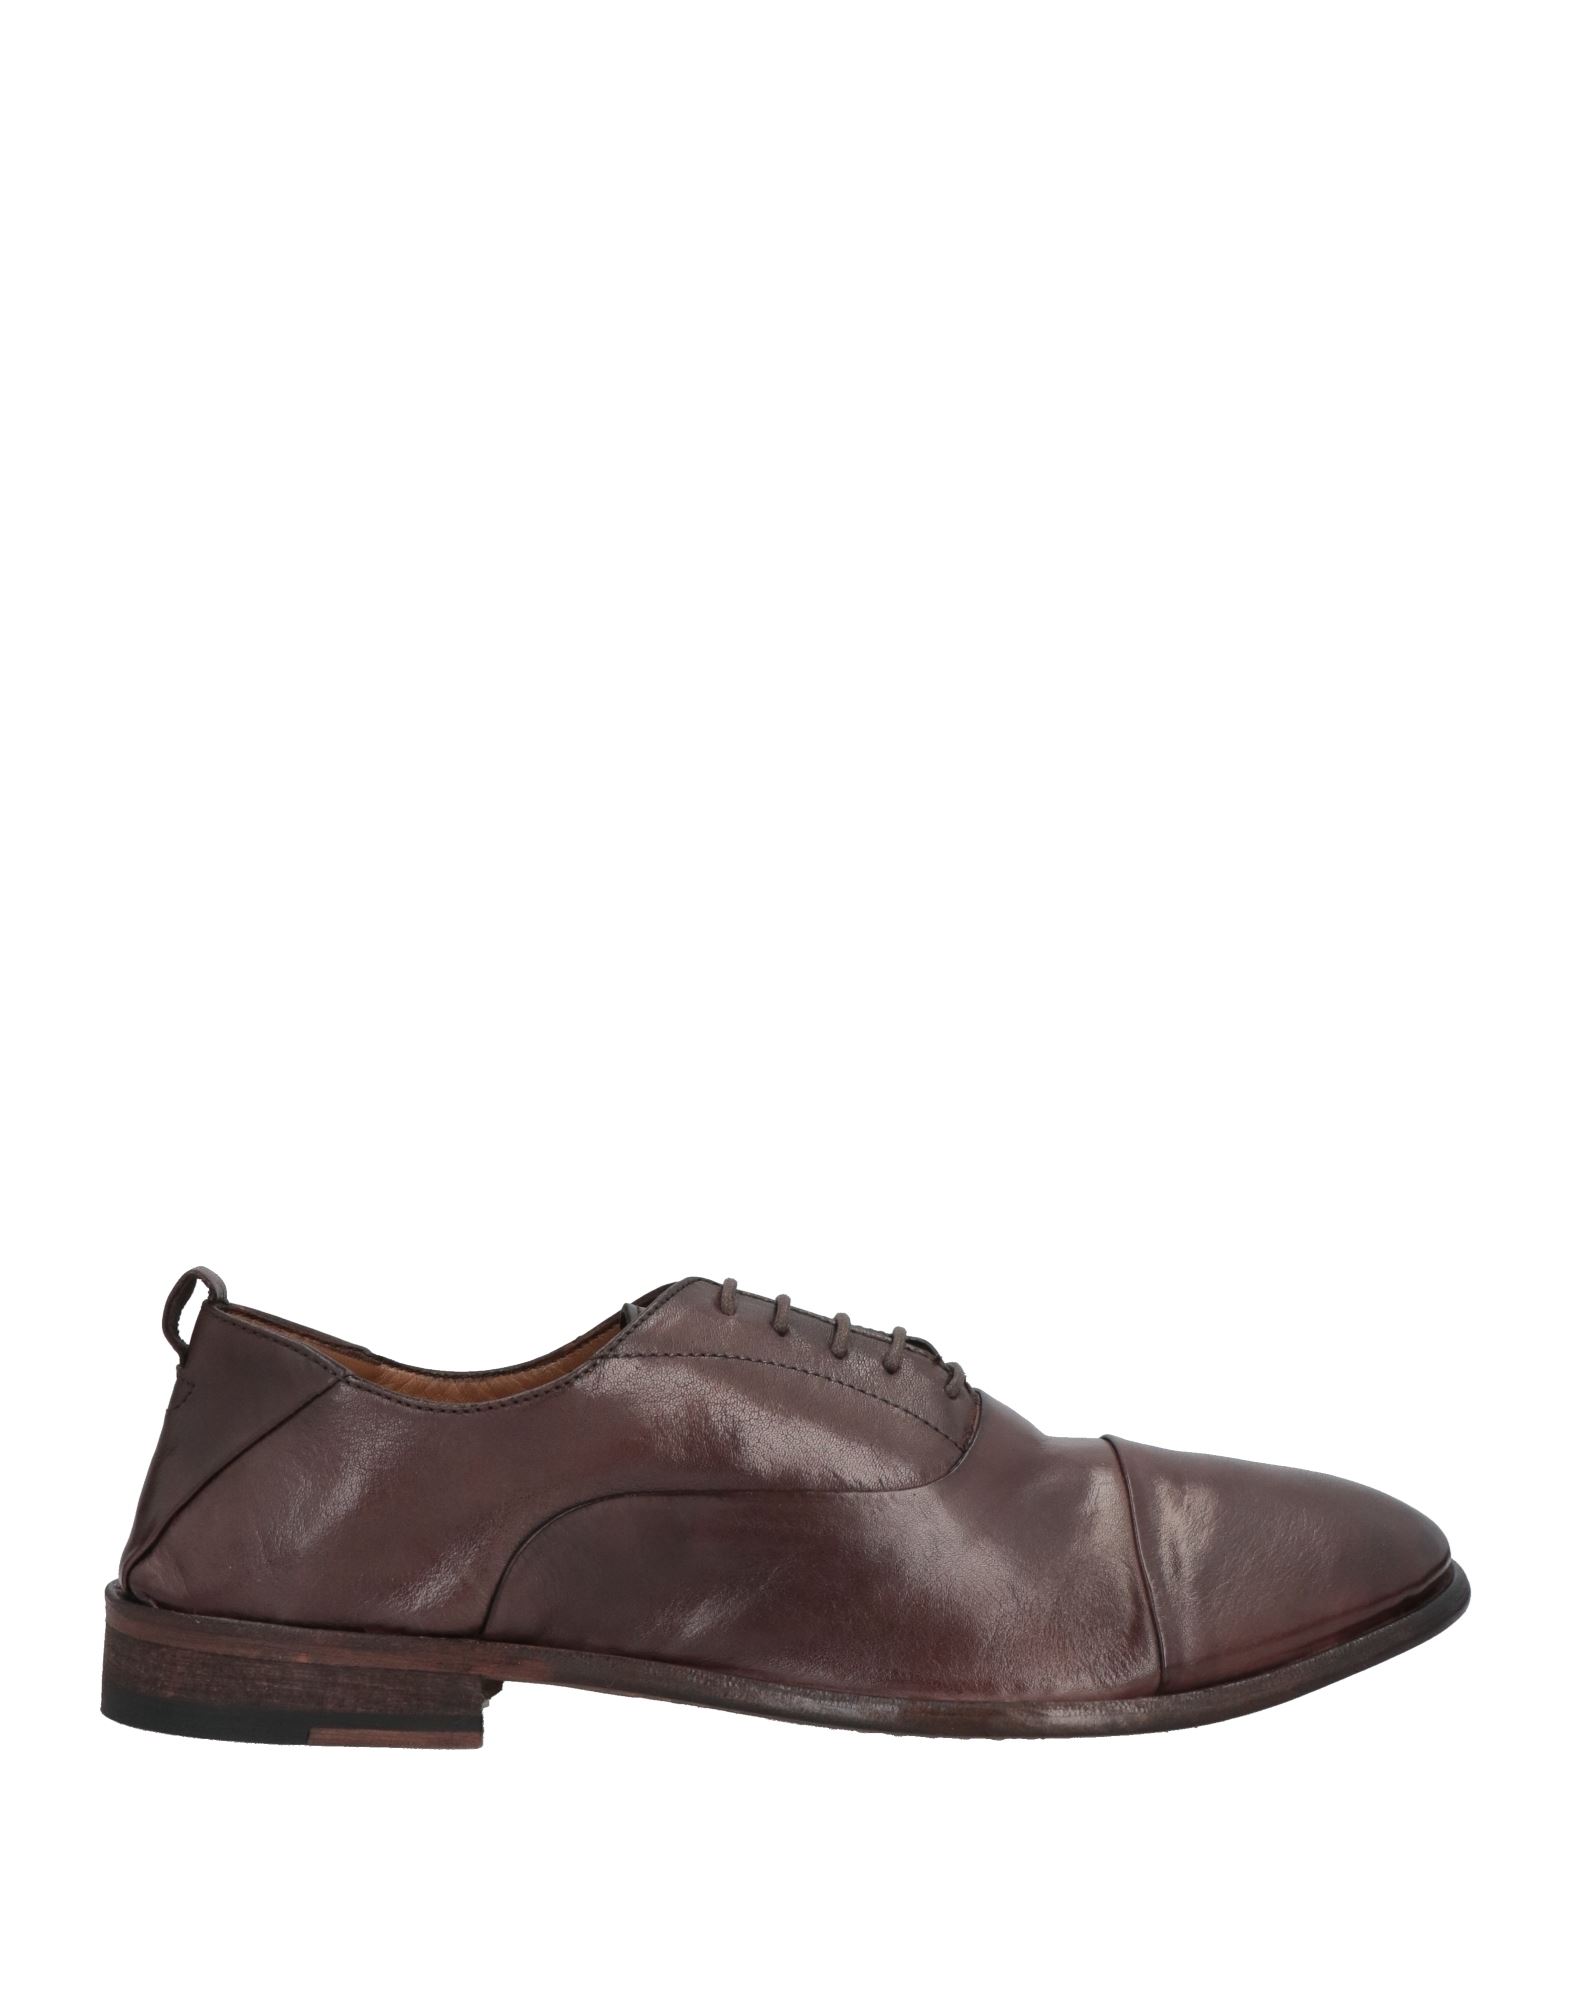 Calpierre Lace-up Shoes In Cocoa